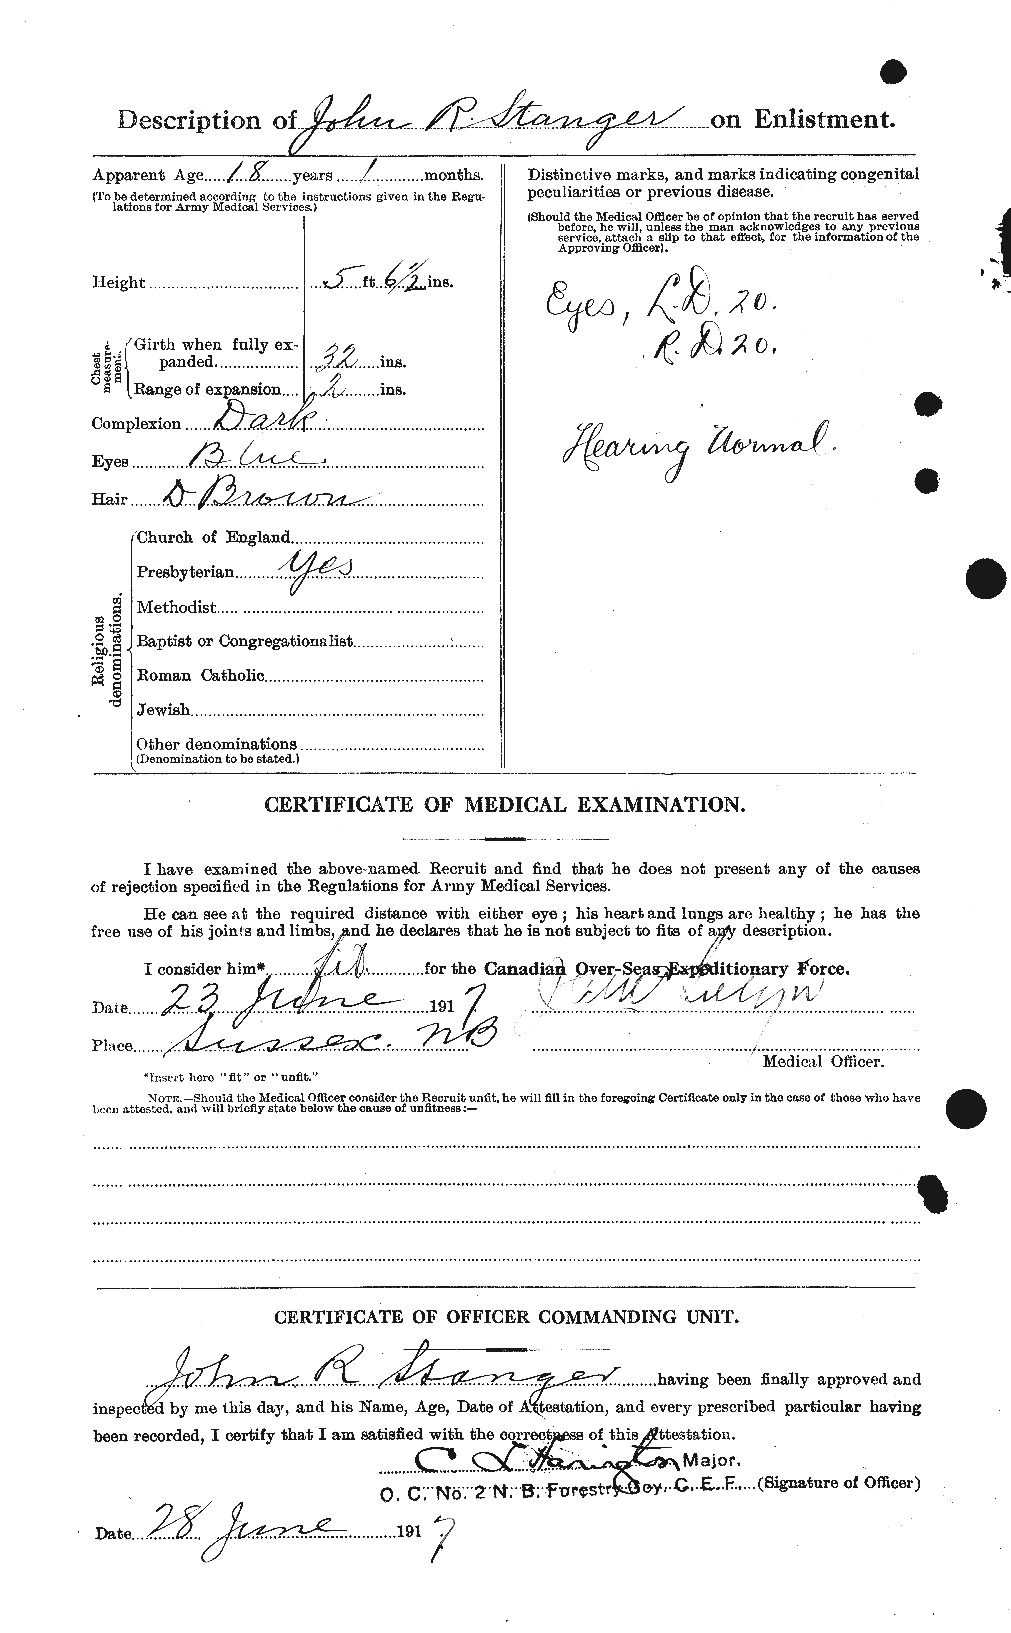 Personnel Records of the First World War - CEF 115732b